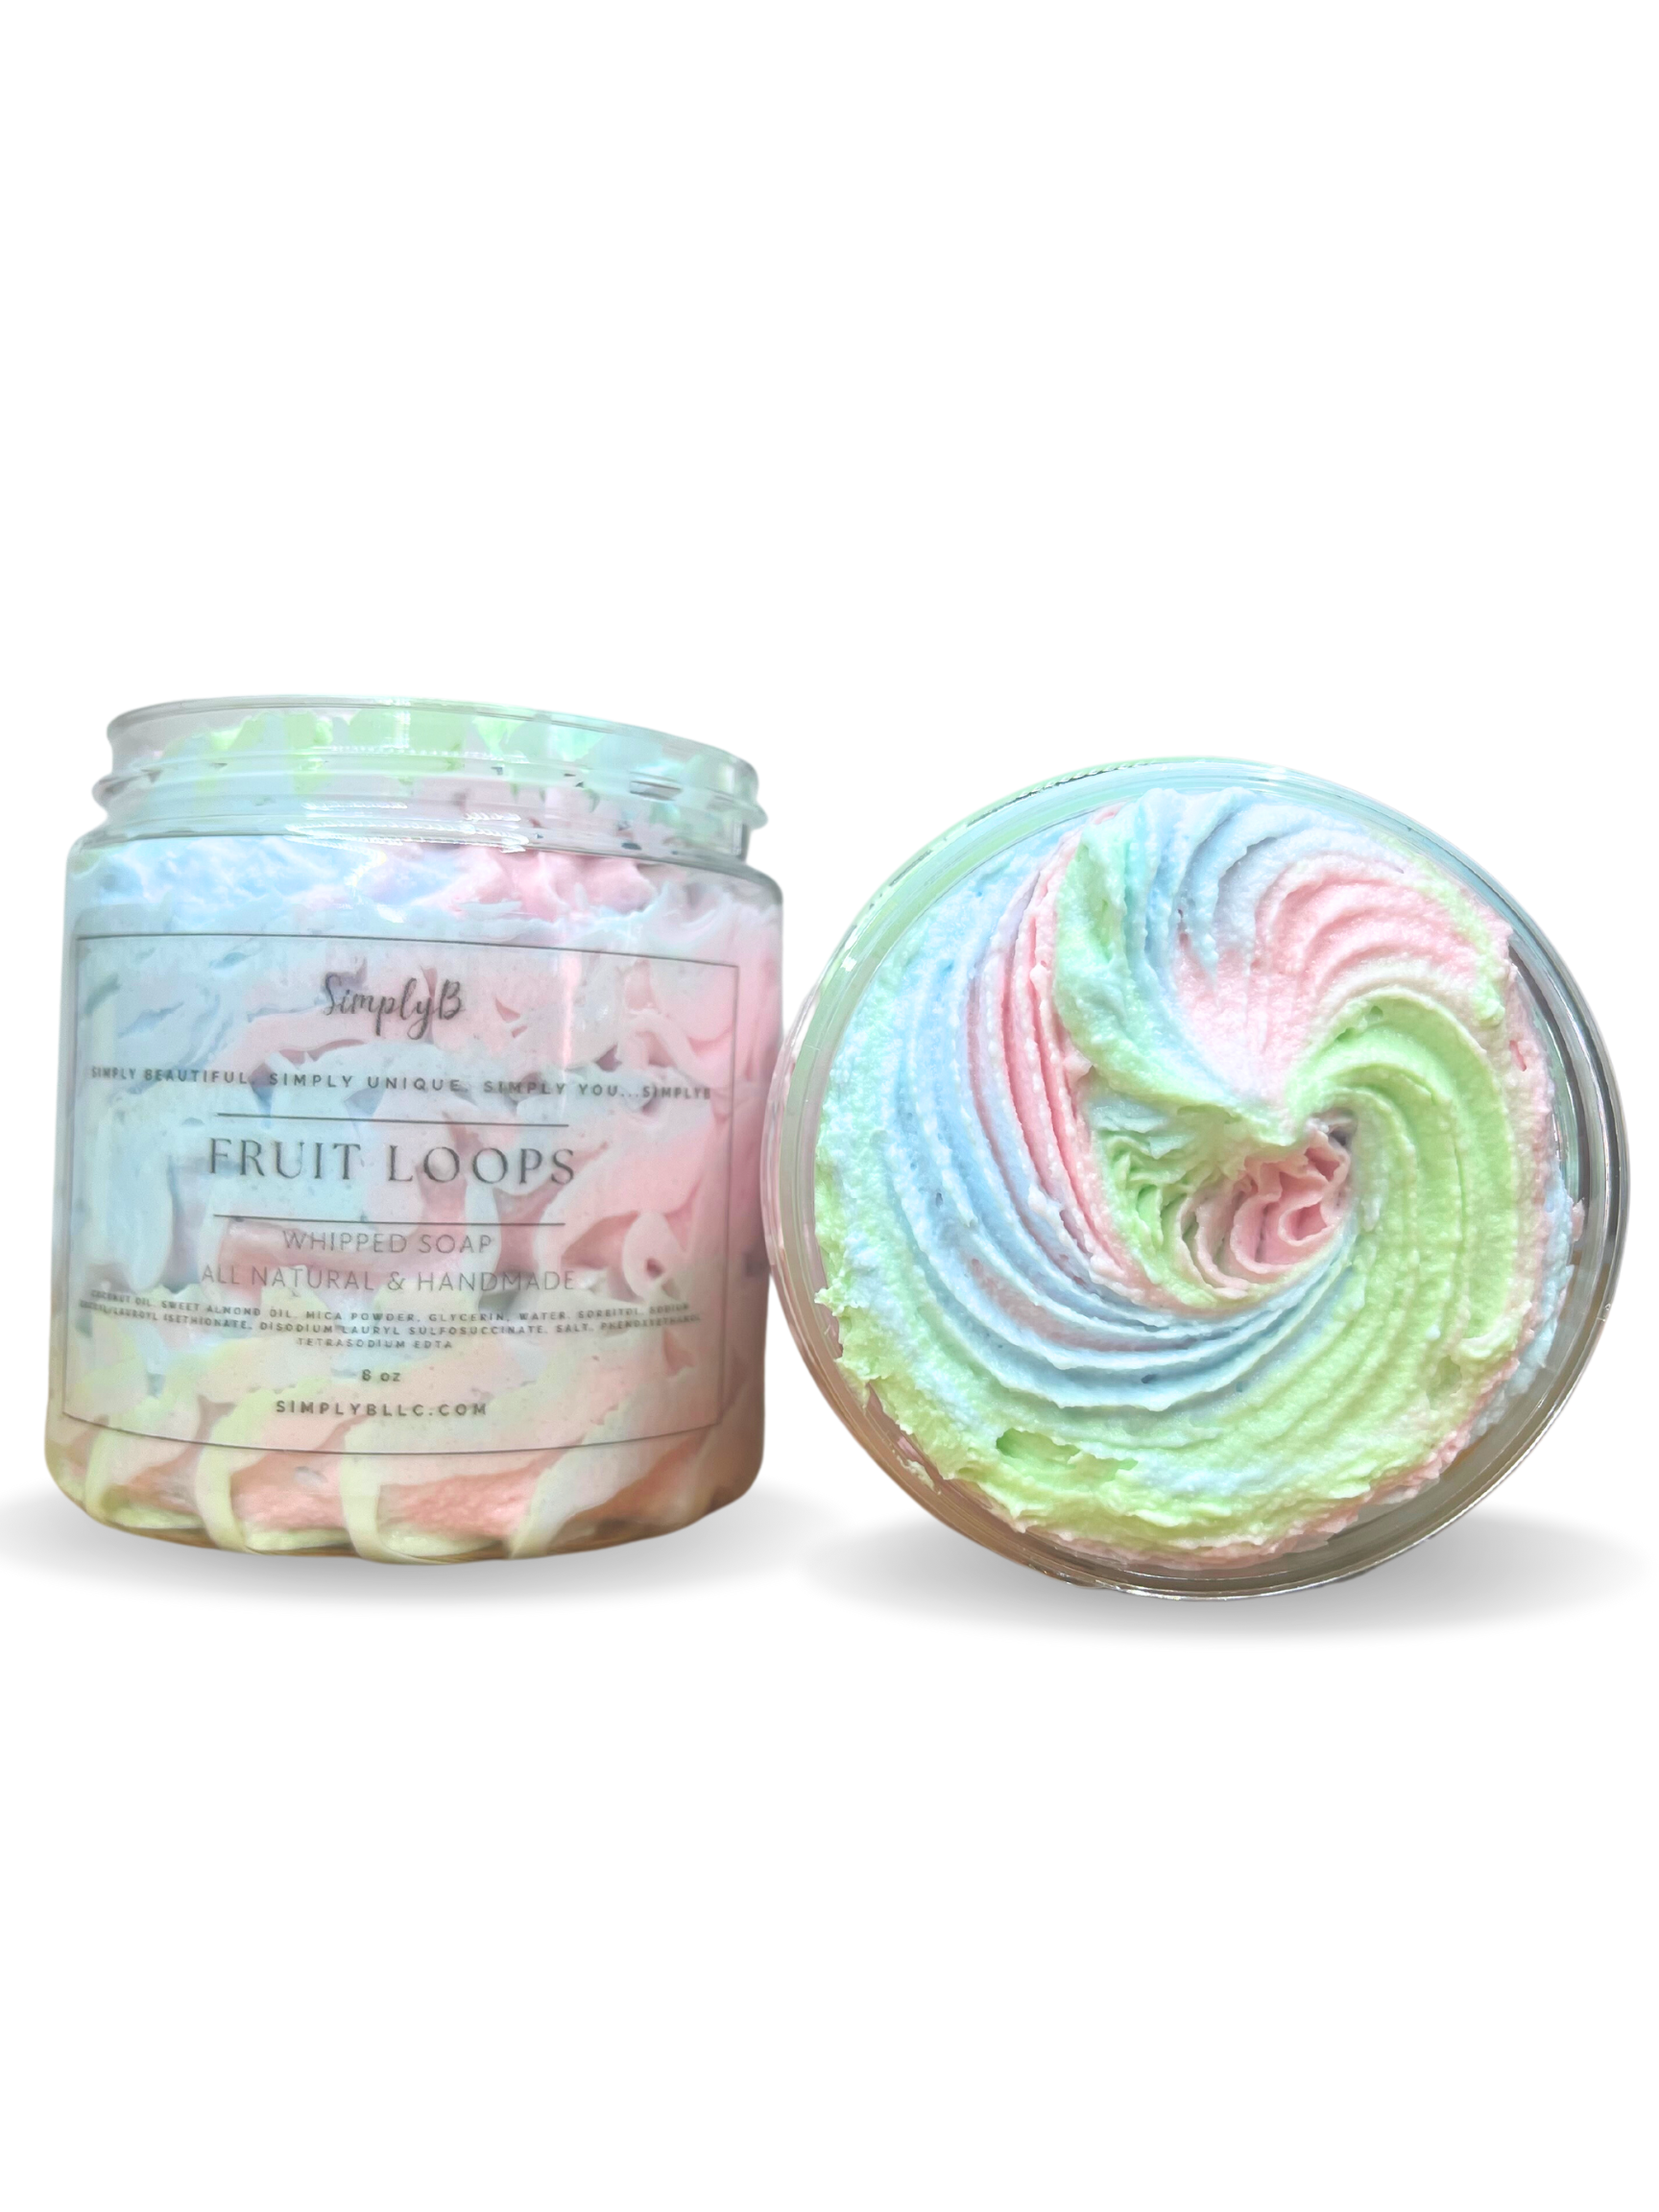 Fruit Loop Whipped Soap